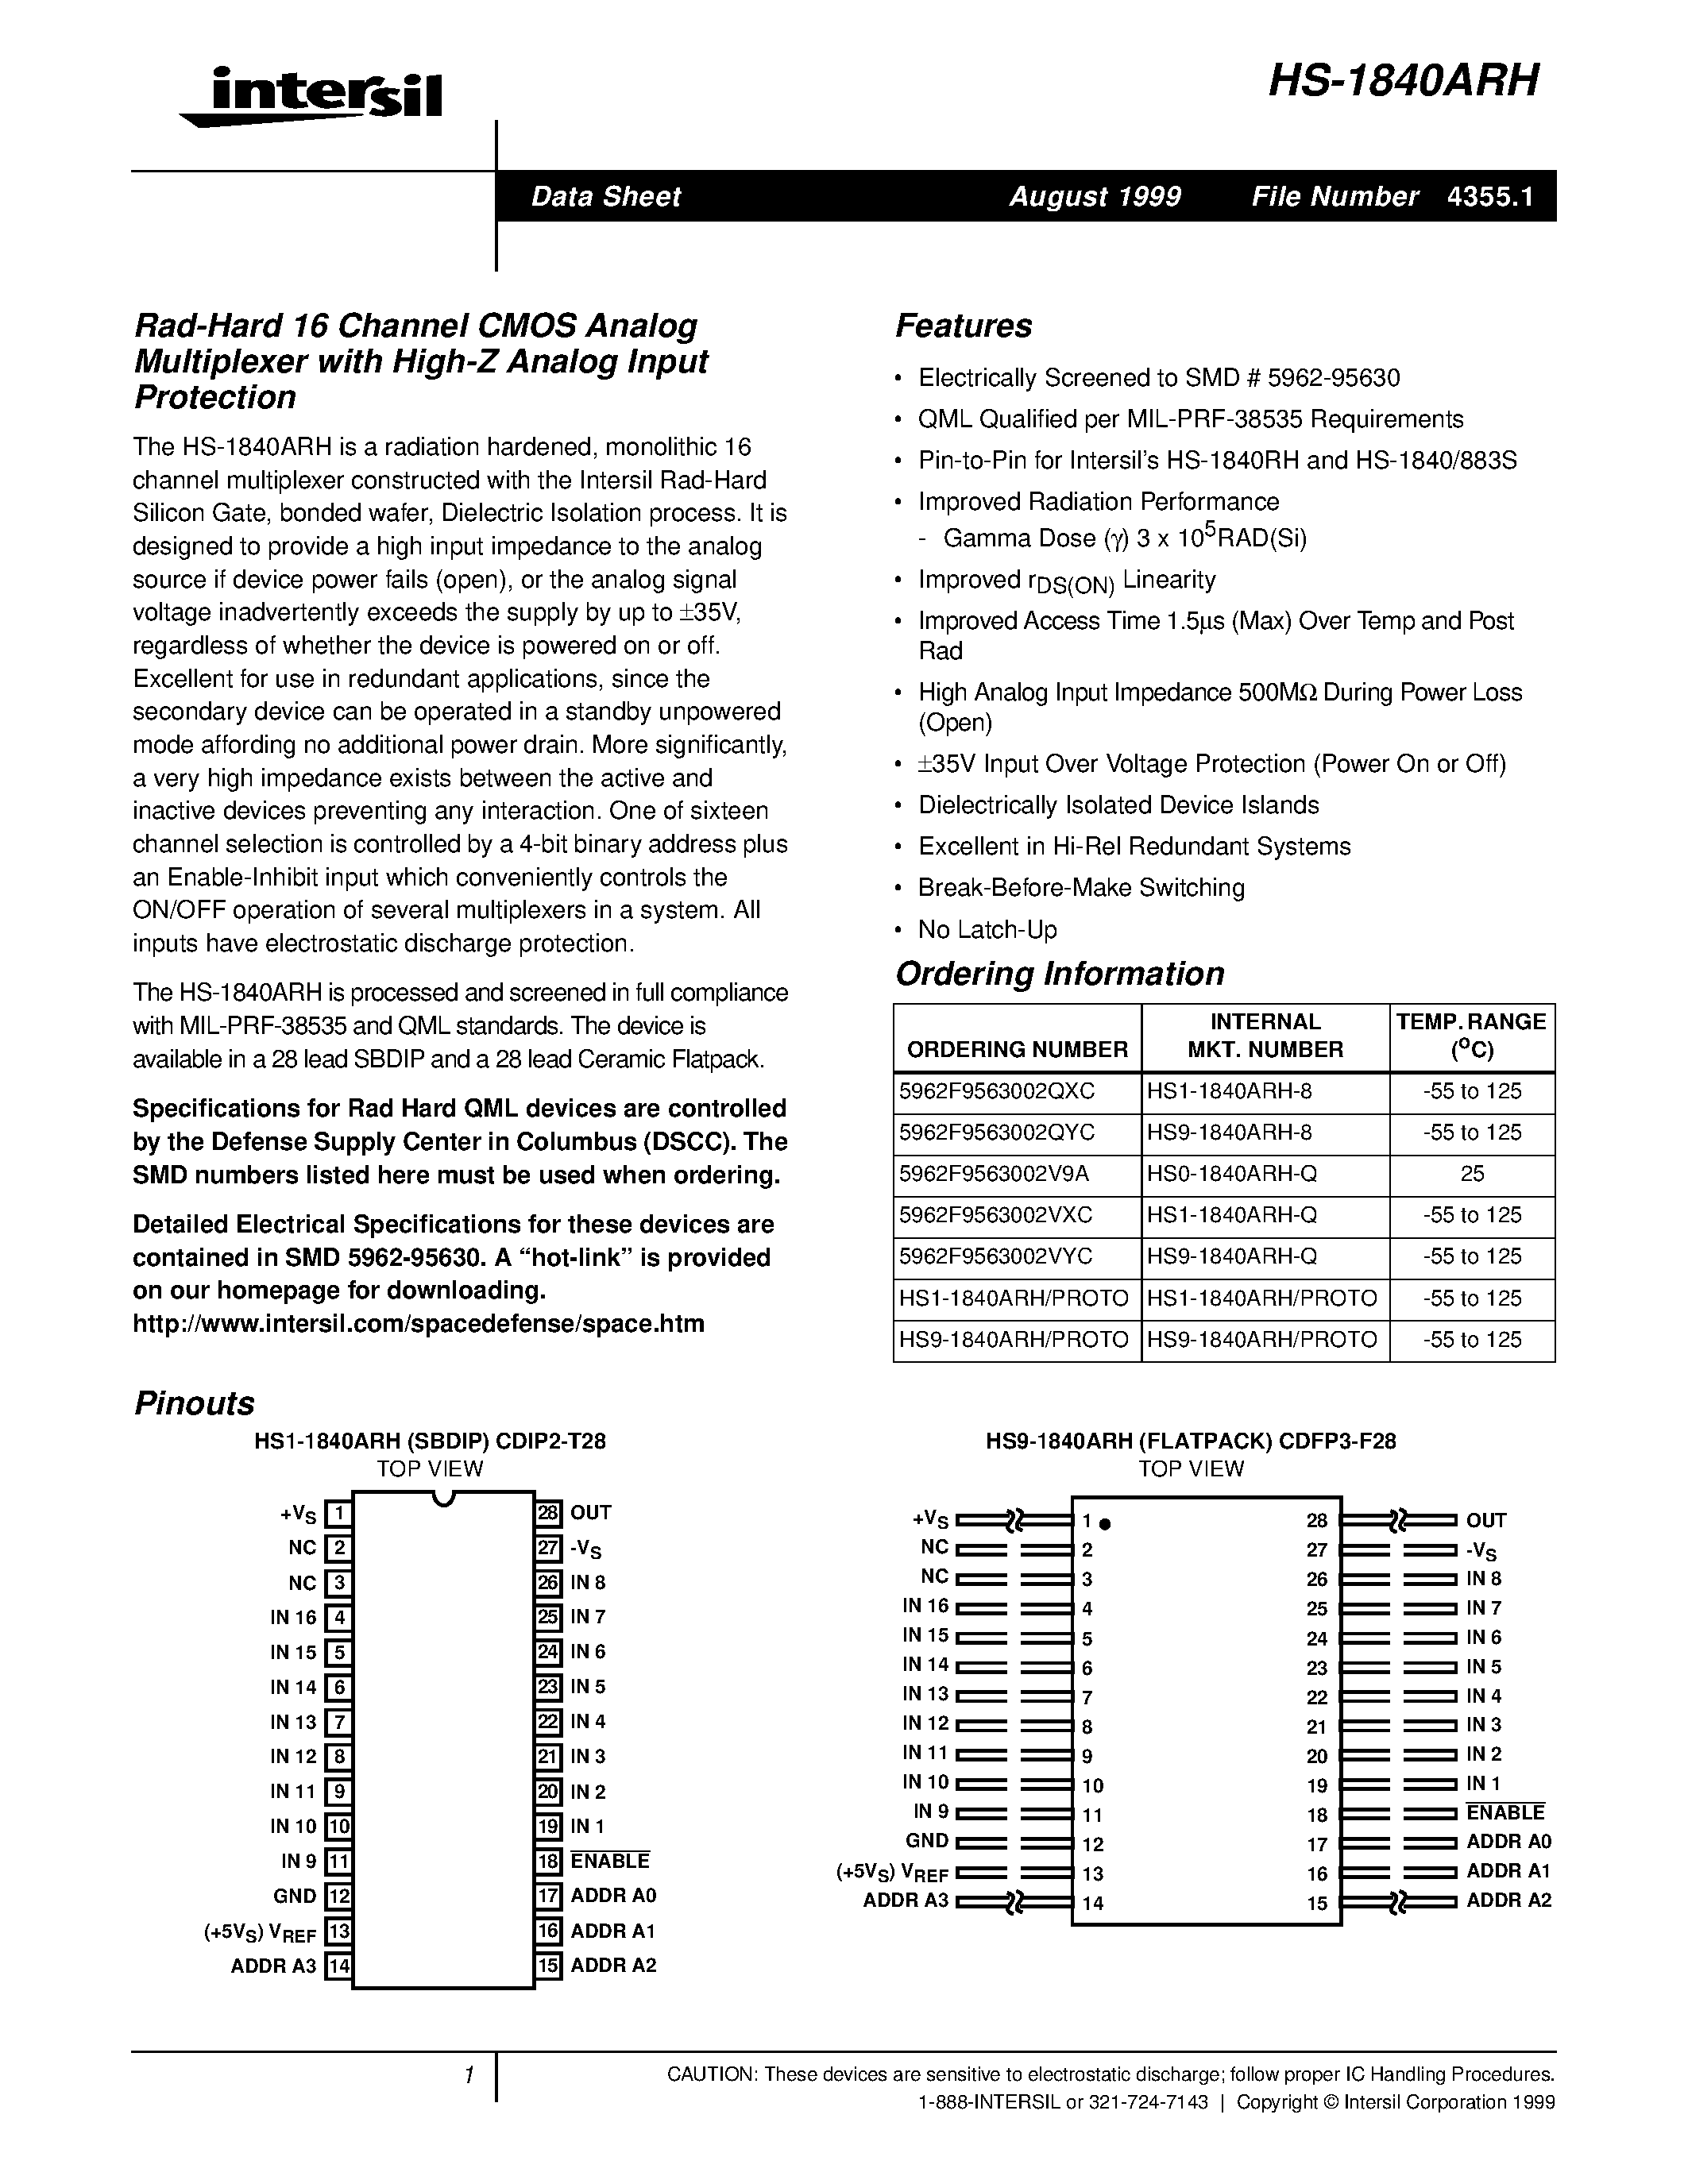 Datasheet HS0-1840ARH-Q - Rad-Hard 16 Channel CMOS Analog Multiplexer with High-Z Analog Input Protection page 1